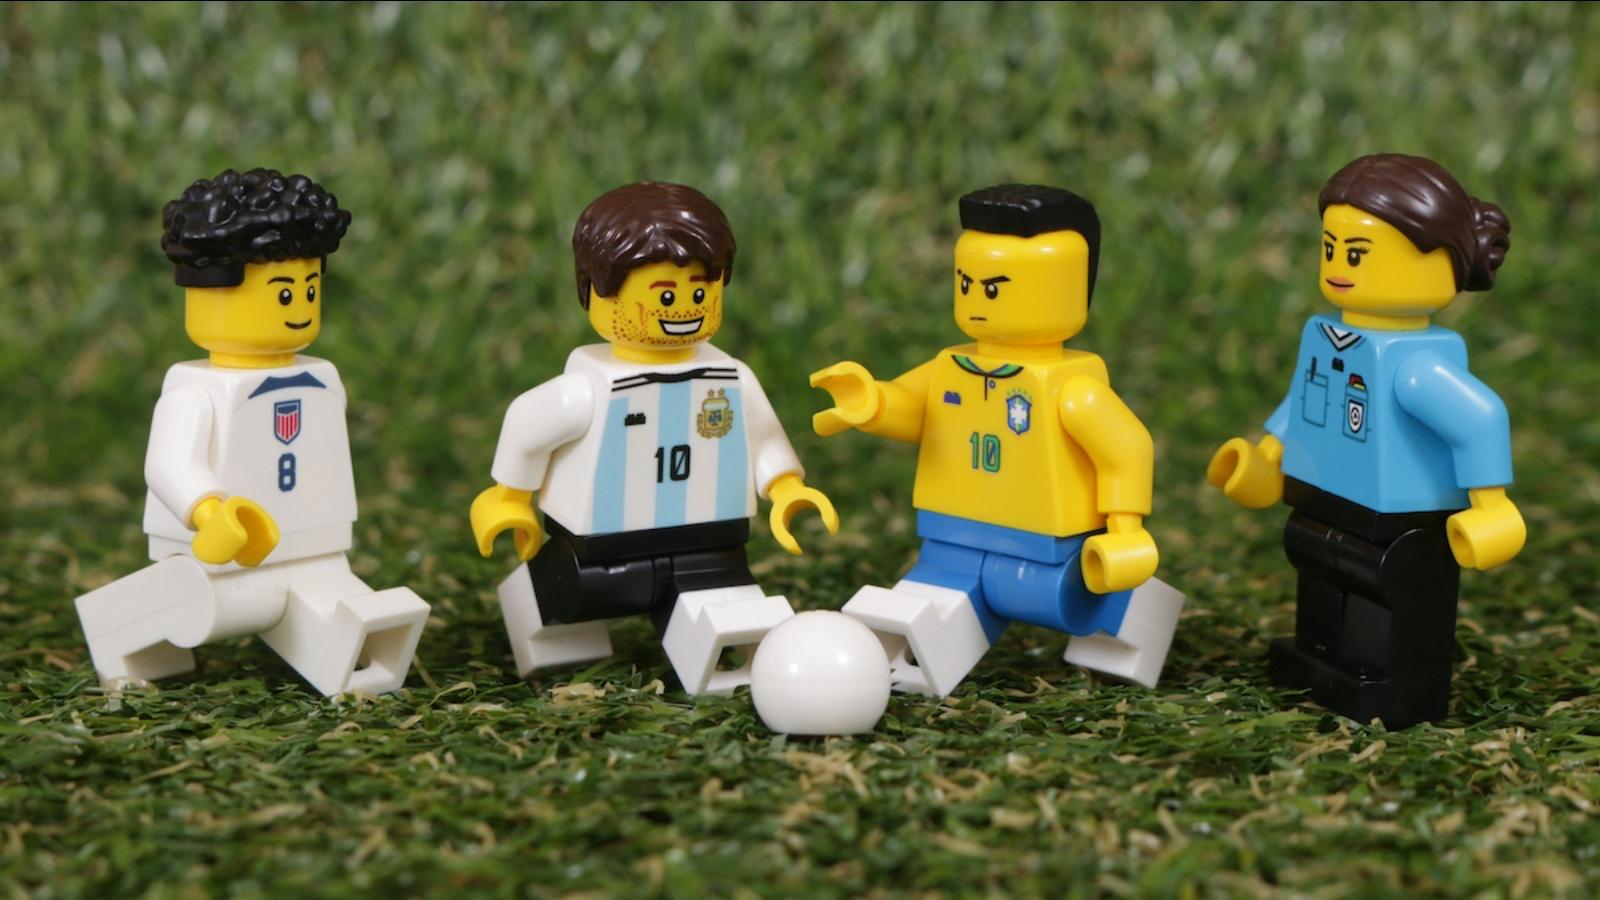 LEGO 2K Goooal! could be a genuine EA Sports FC competitor - Dexerto